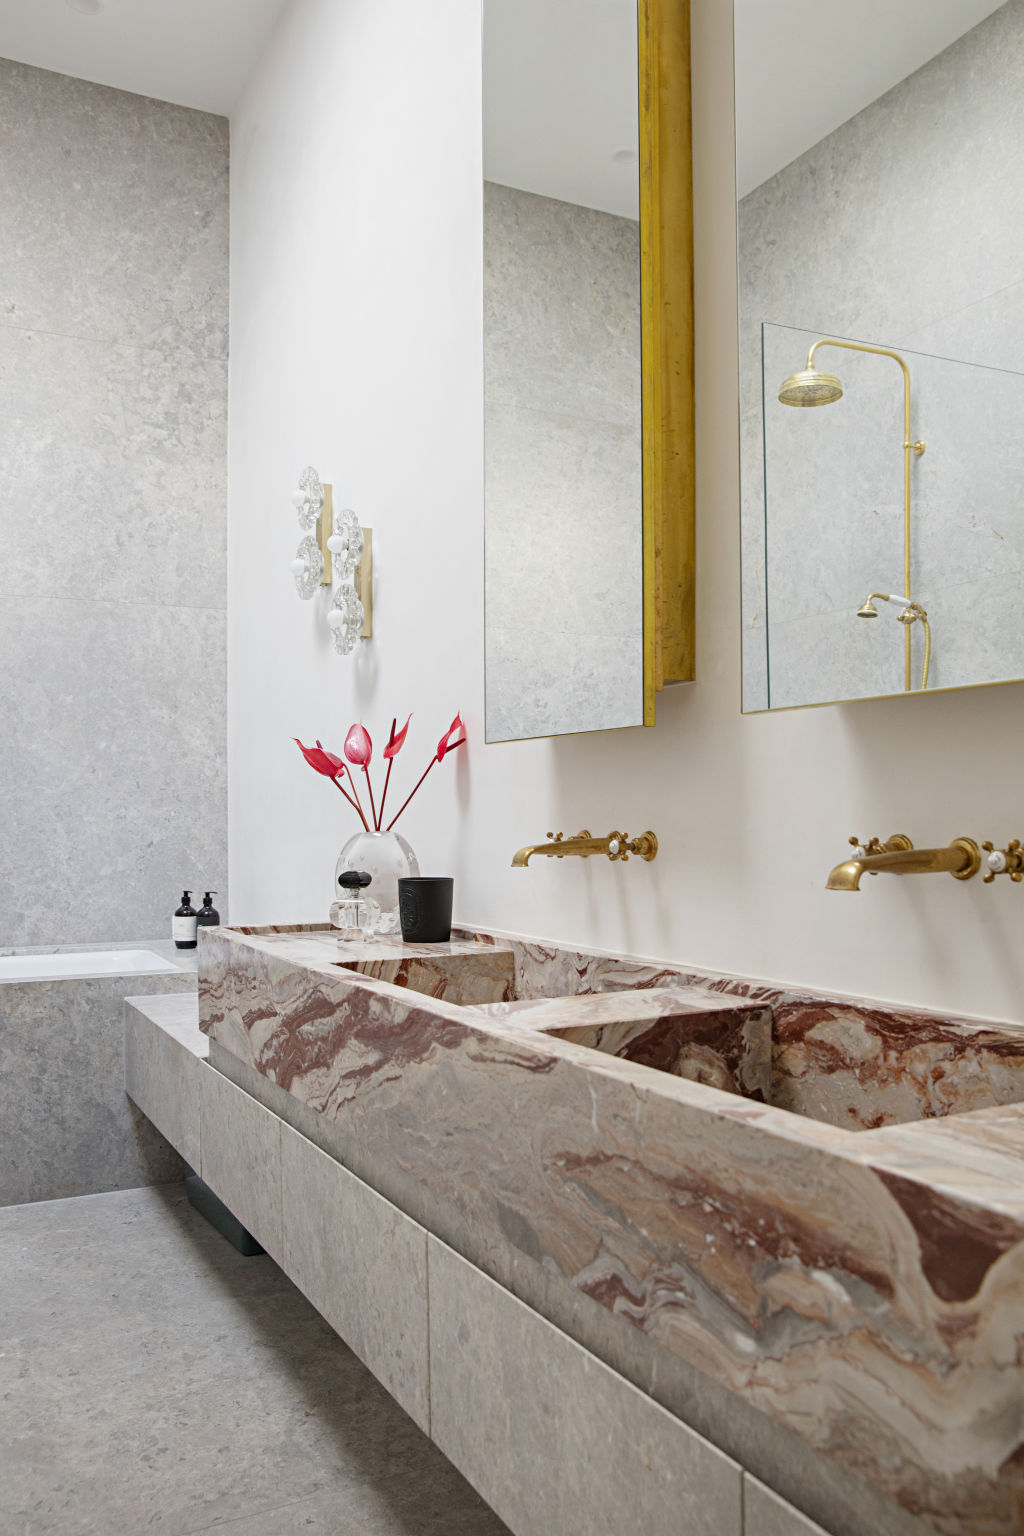 The bathrooms are swathed in swirling Italian rosso and grigio marble. Photo: Natalie Jeffcott